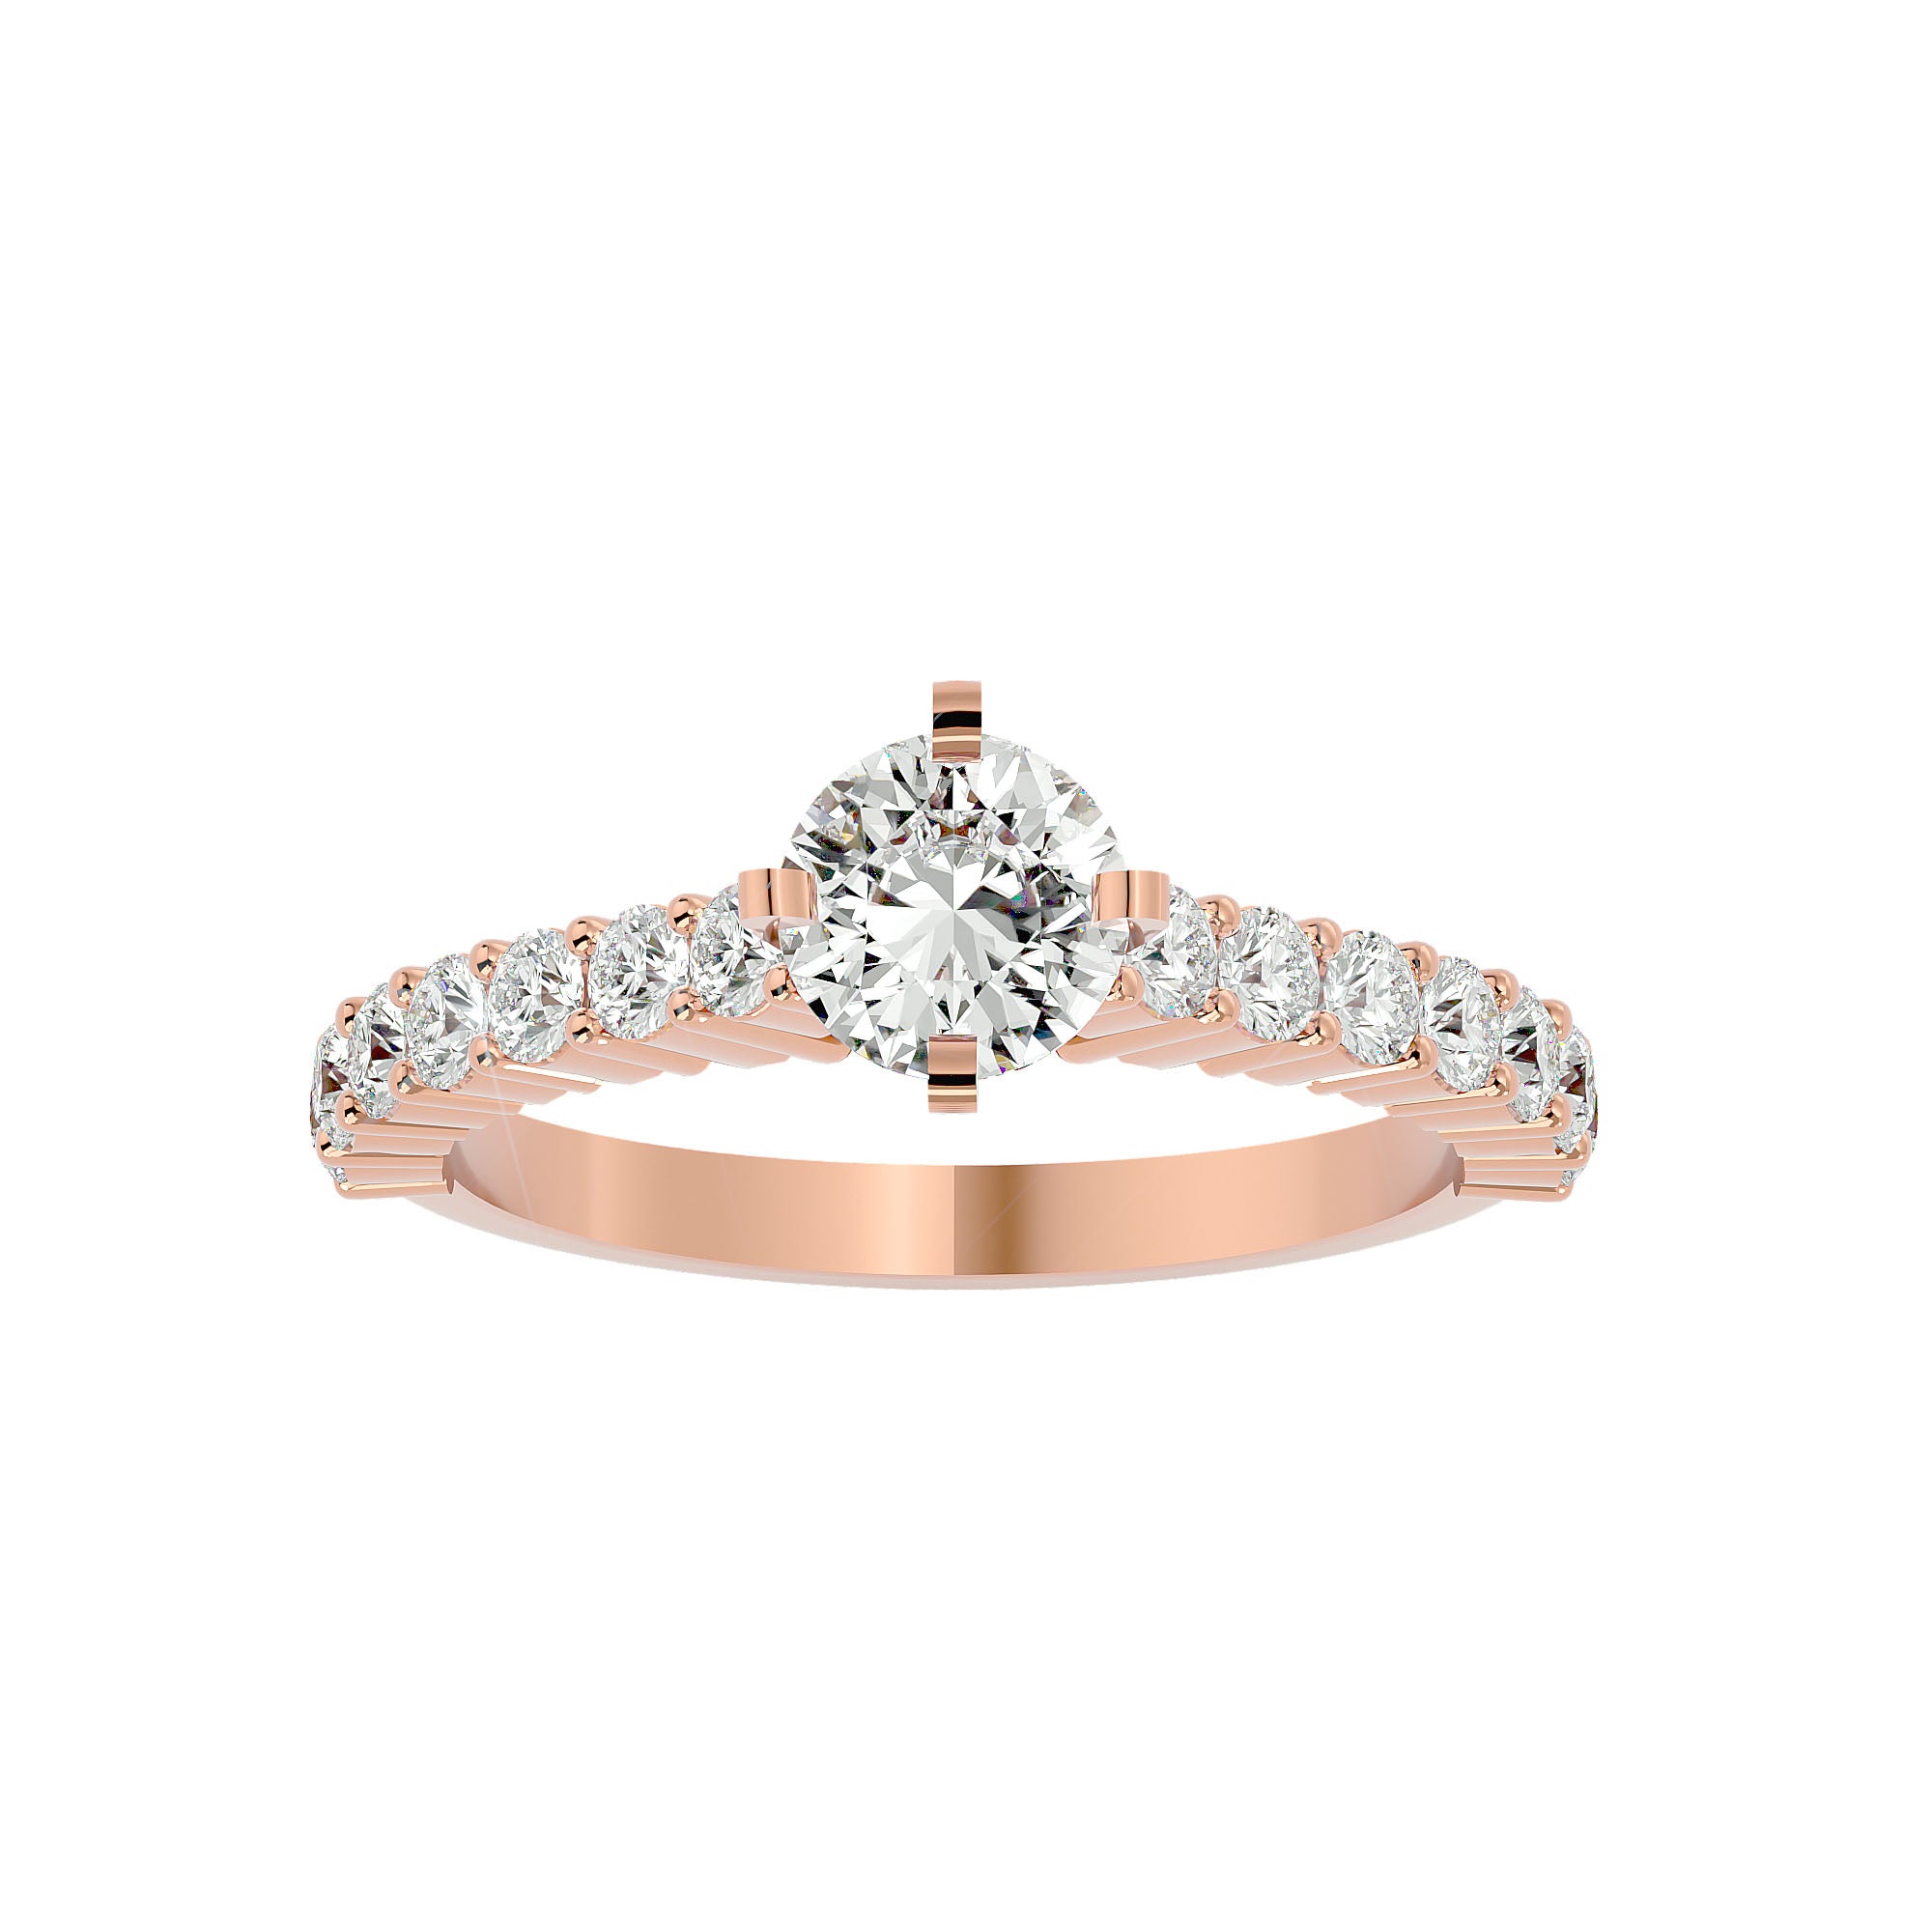 HOH Bizzy Diamond Solitaire Ring